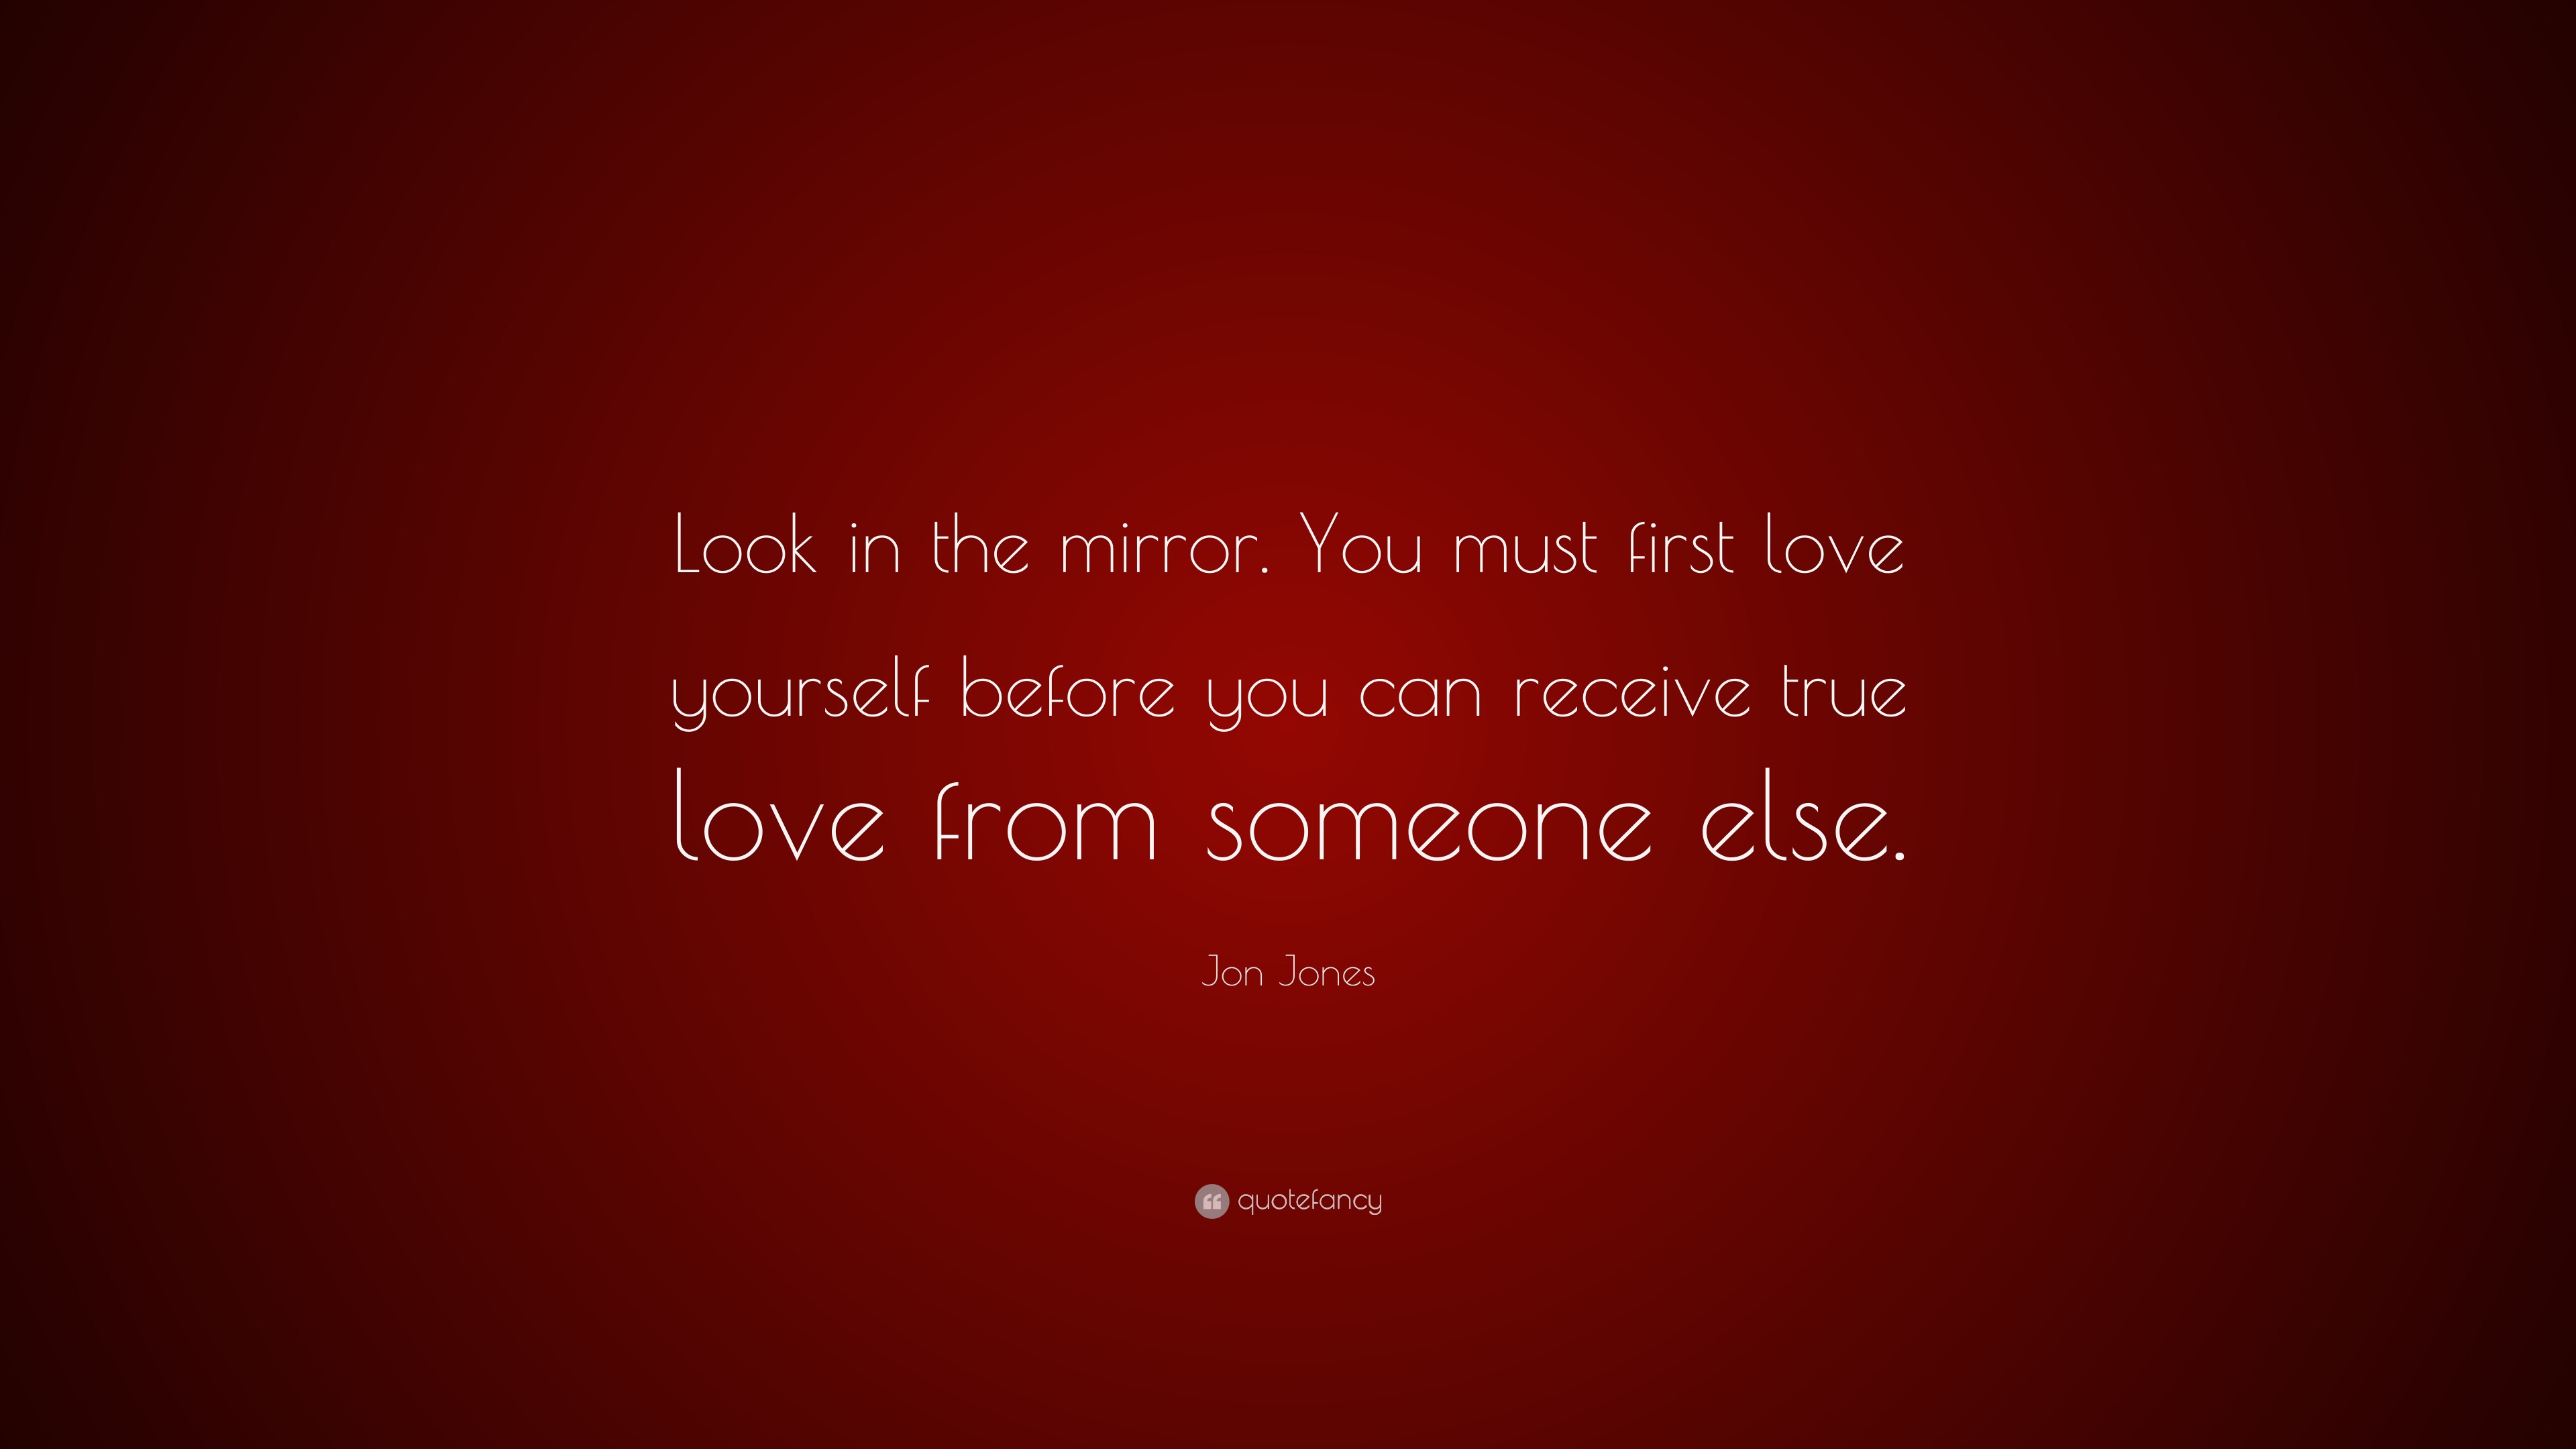 Jon Jones Quote “Look in the mirror You must first love yourself before